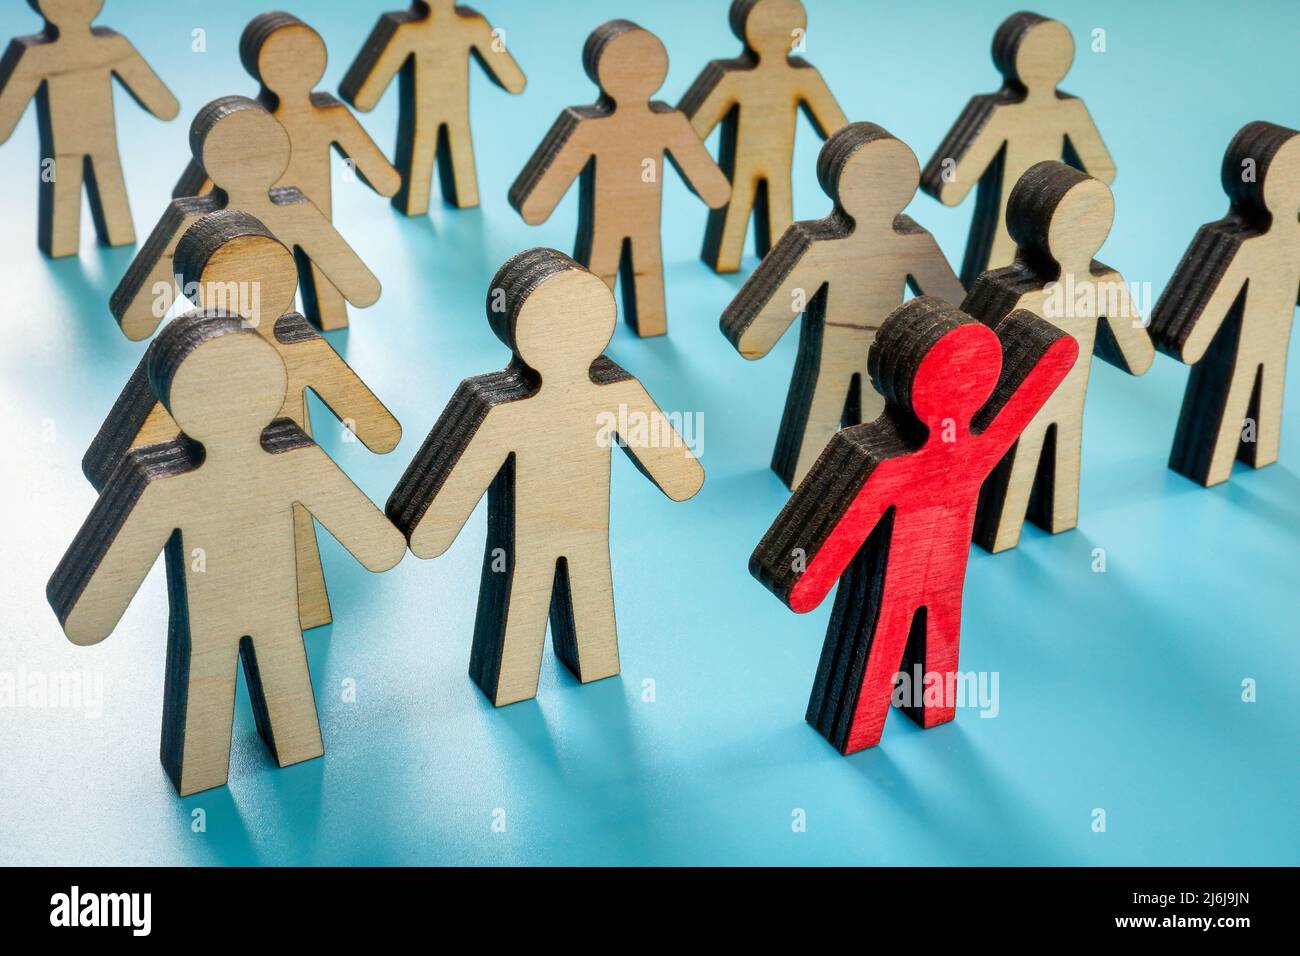 Crowd from figurines and red one as a leader. Stock Photo